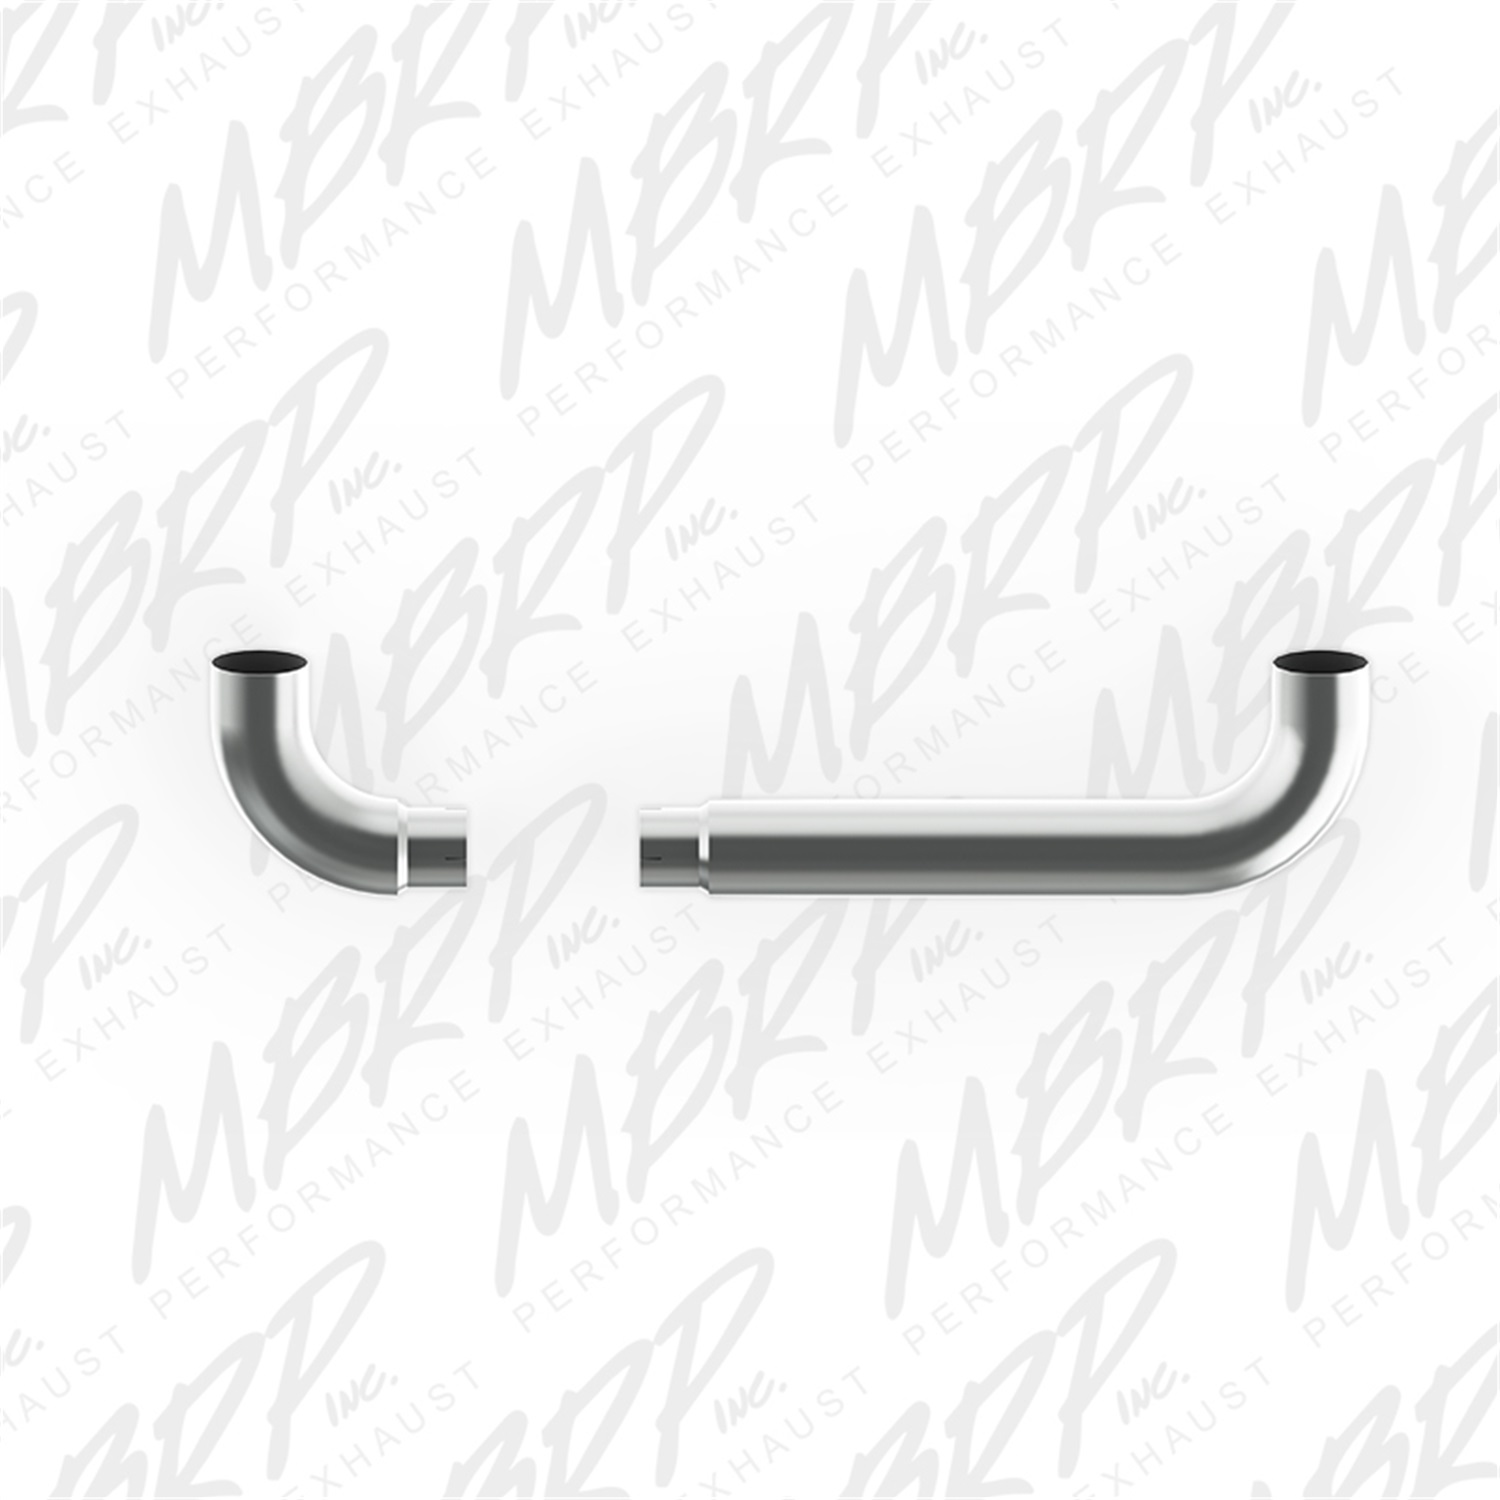 MBRP Exhaust MBRP Exhaust UTA001 T-Pipe Replacement Elbow Kit